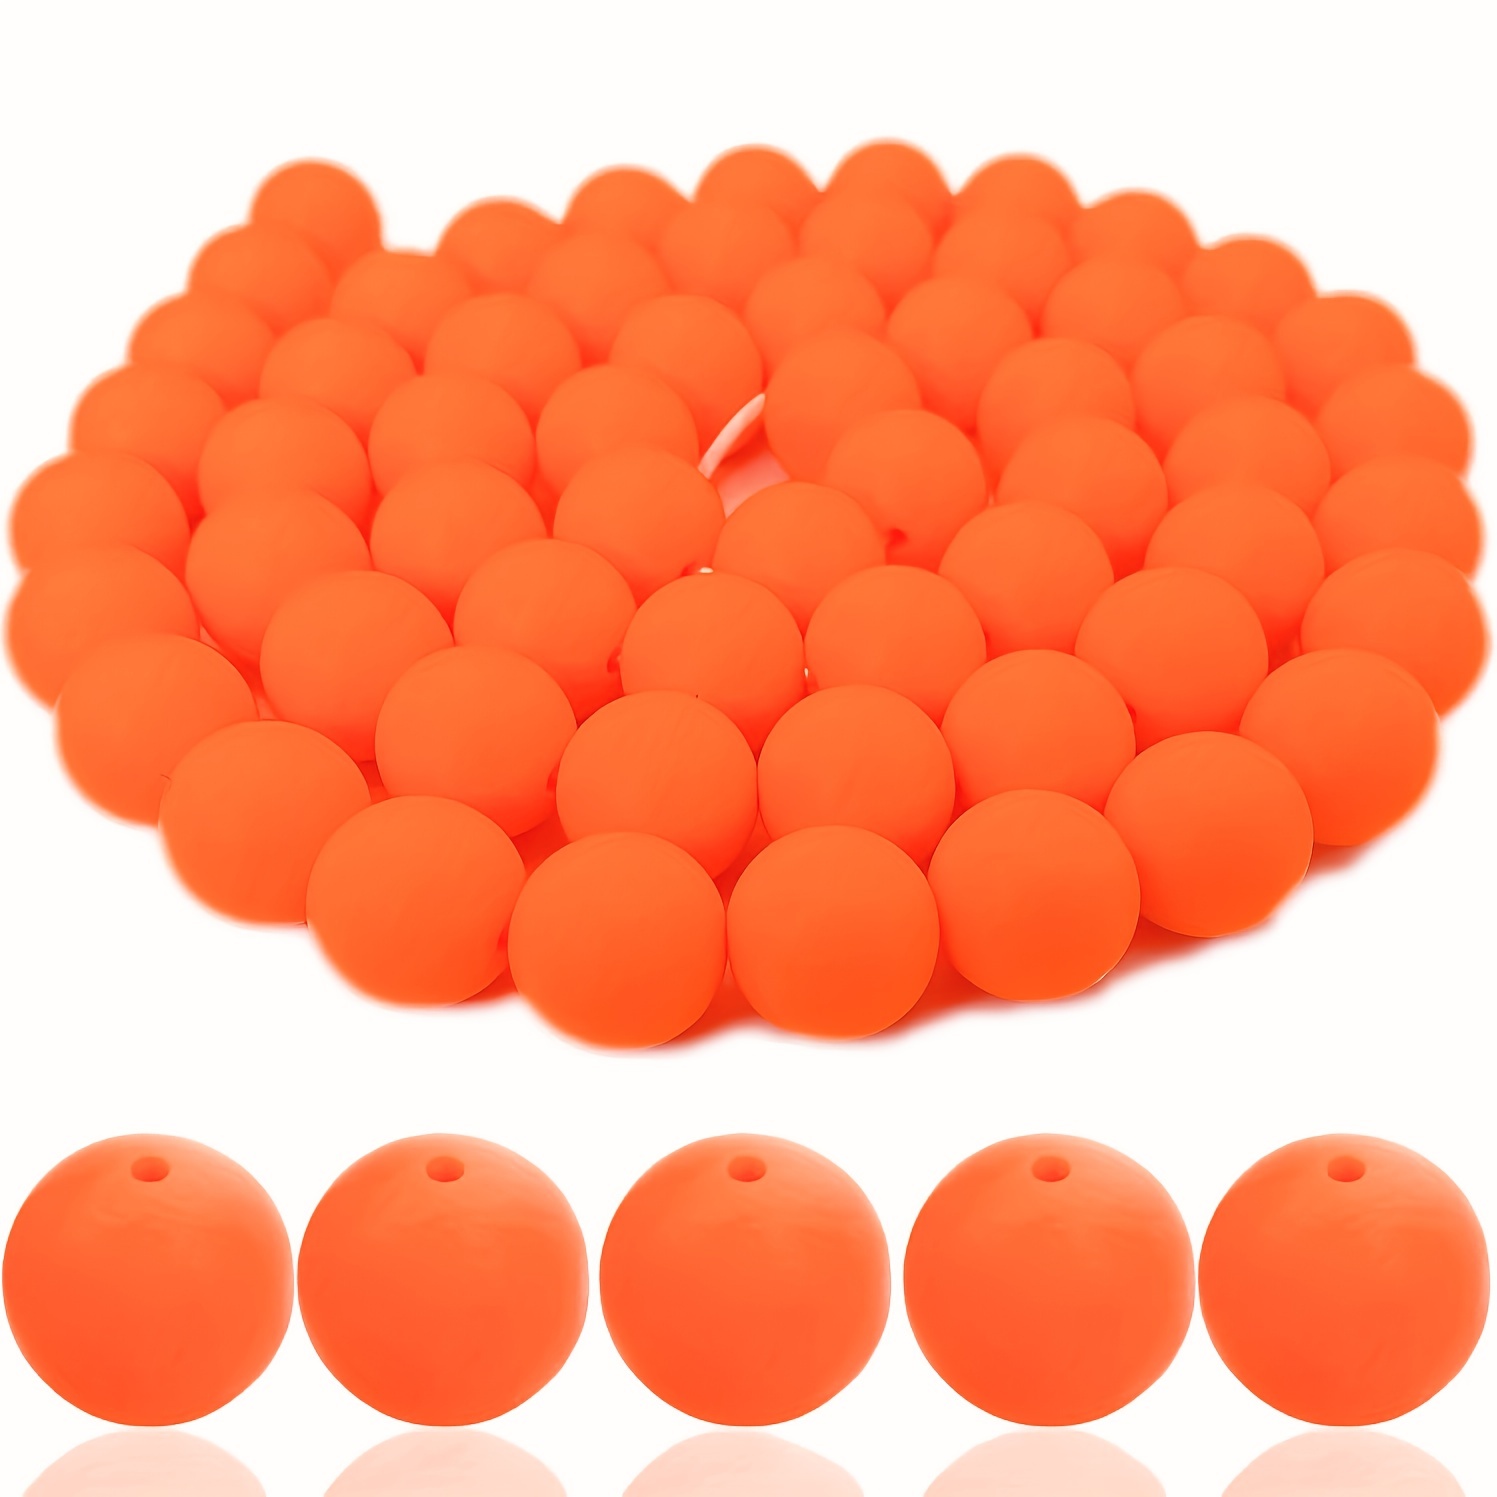 60 PCS 15mm Silicone Focal Beads Bulk Rubber Beads Craft Beads Earring